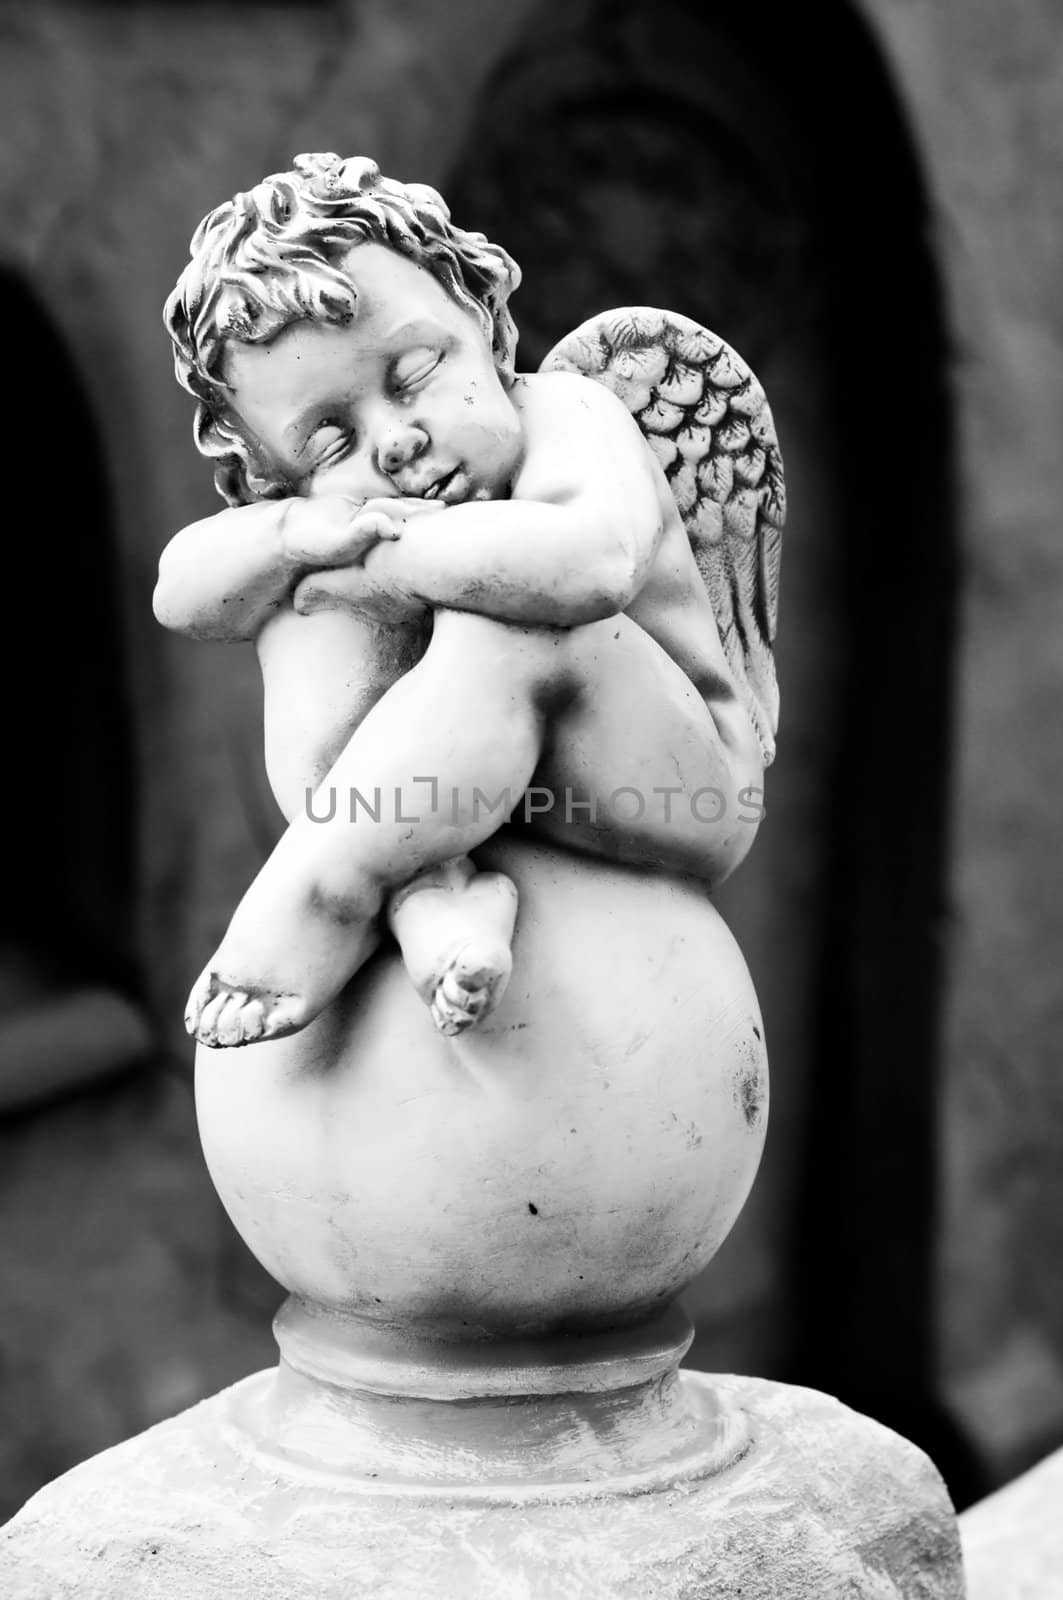 An angel statue by alena0509